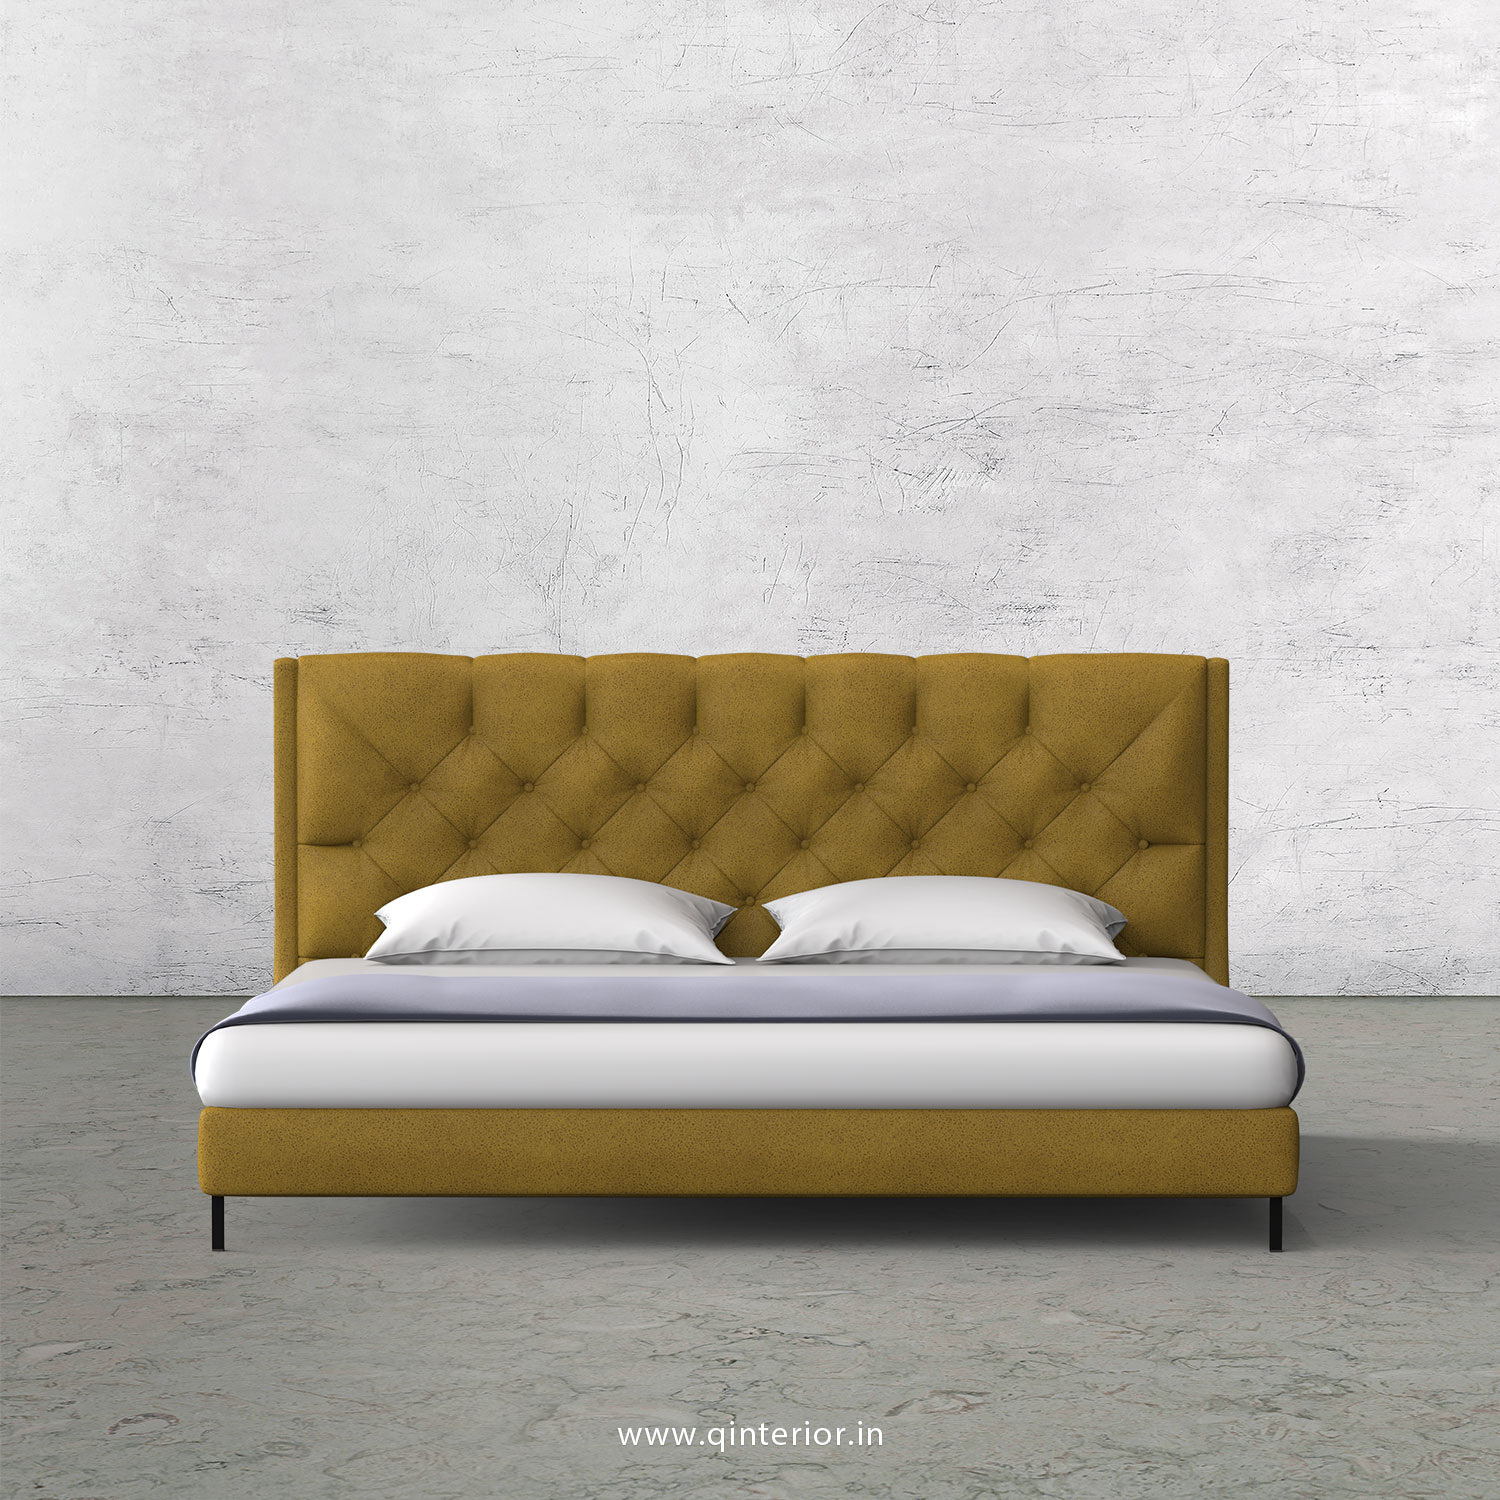 Scorpius King Size Bed in Fab Leather Fabric - KBD003 FL18